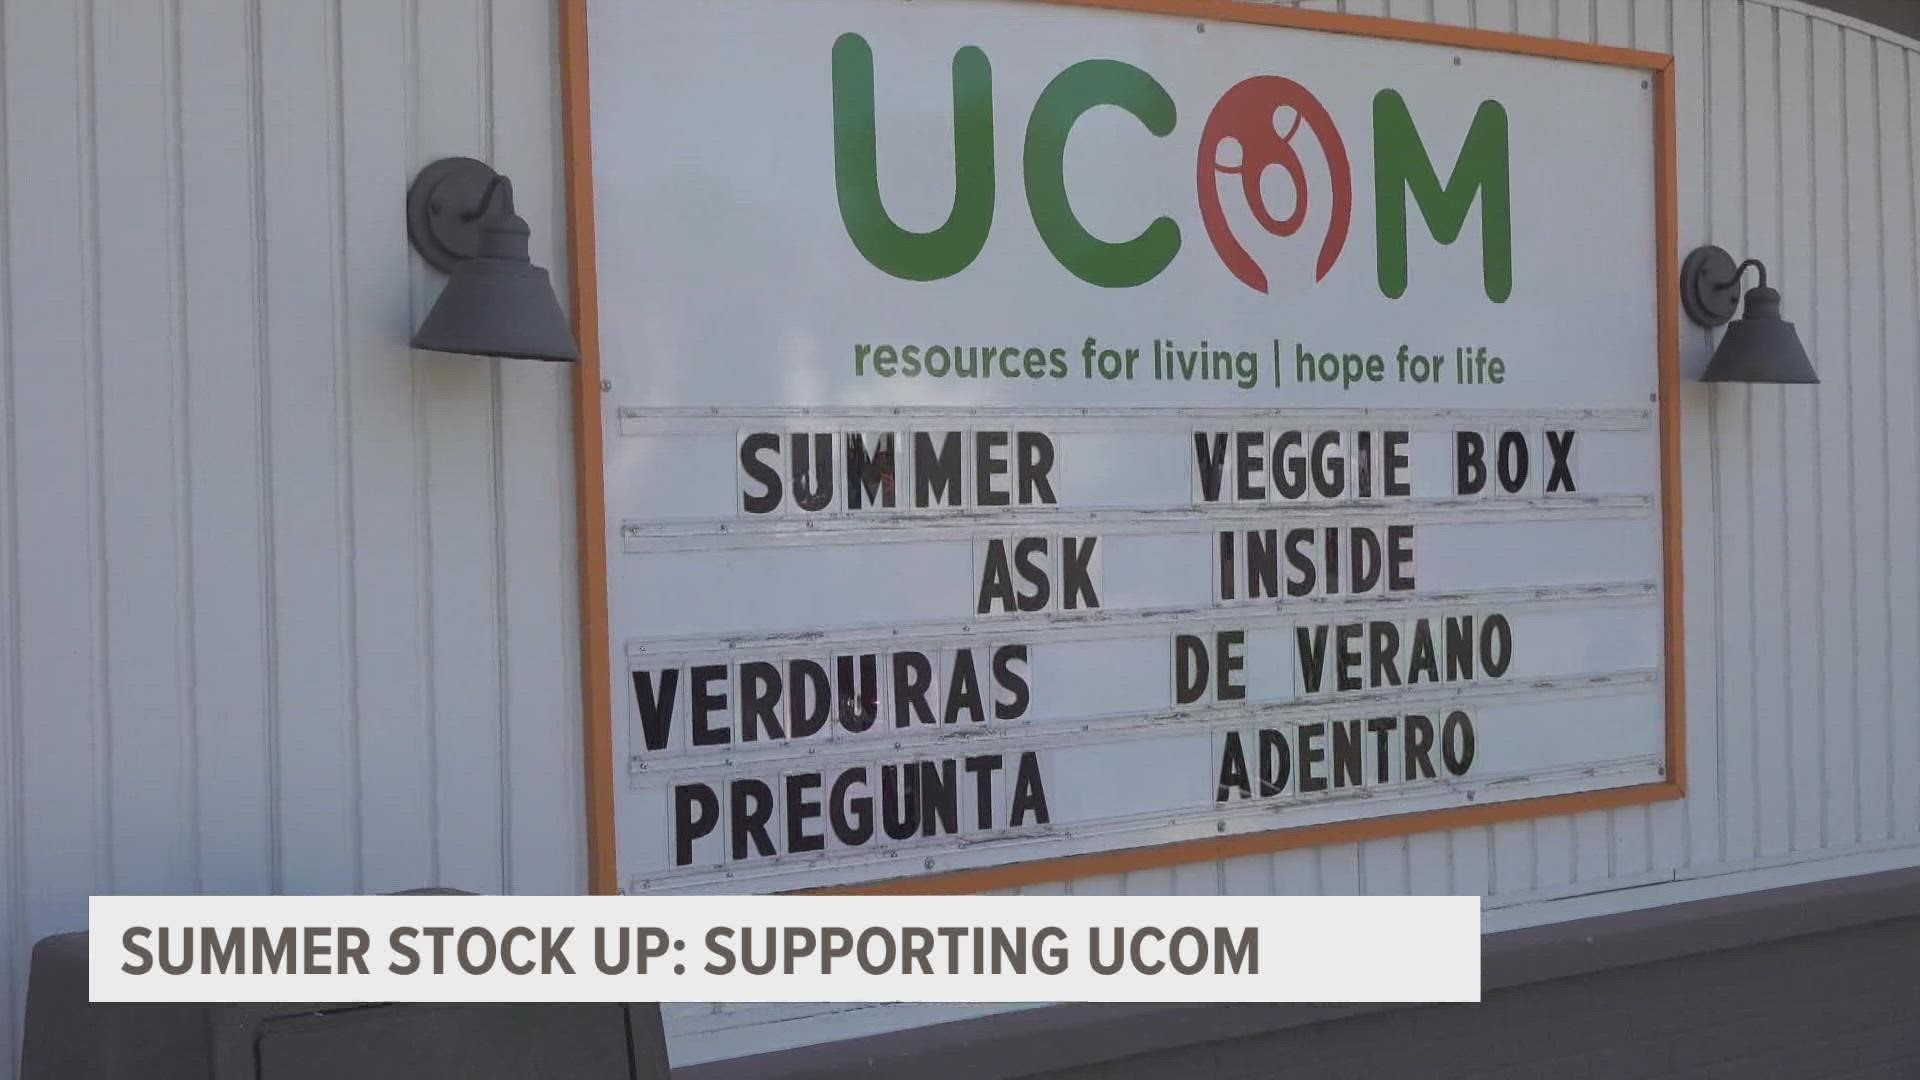 We need your help filling the shelves of local pantries as we continue our Summer Stock Up campaign. Your donations will benefit food pantries like UCOM.